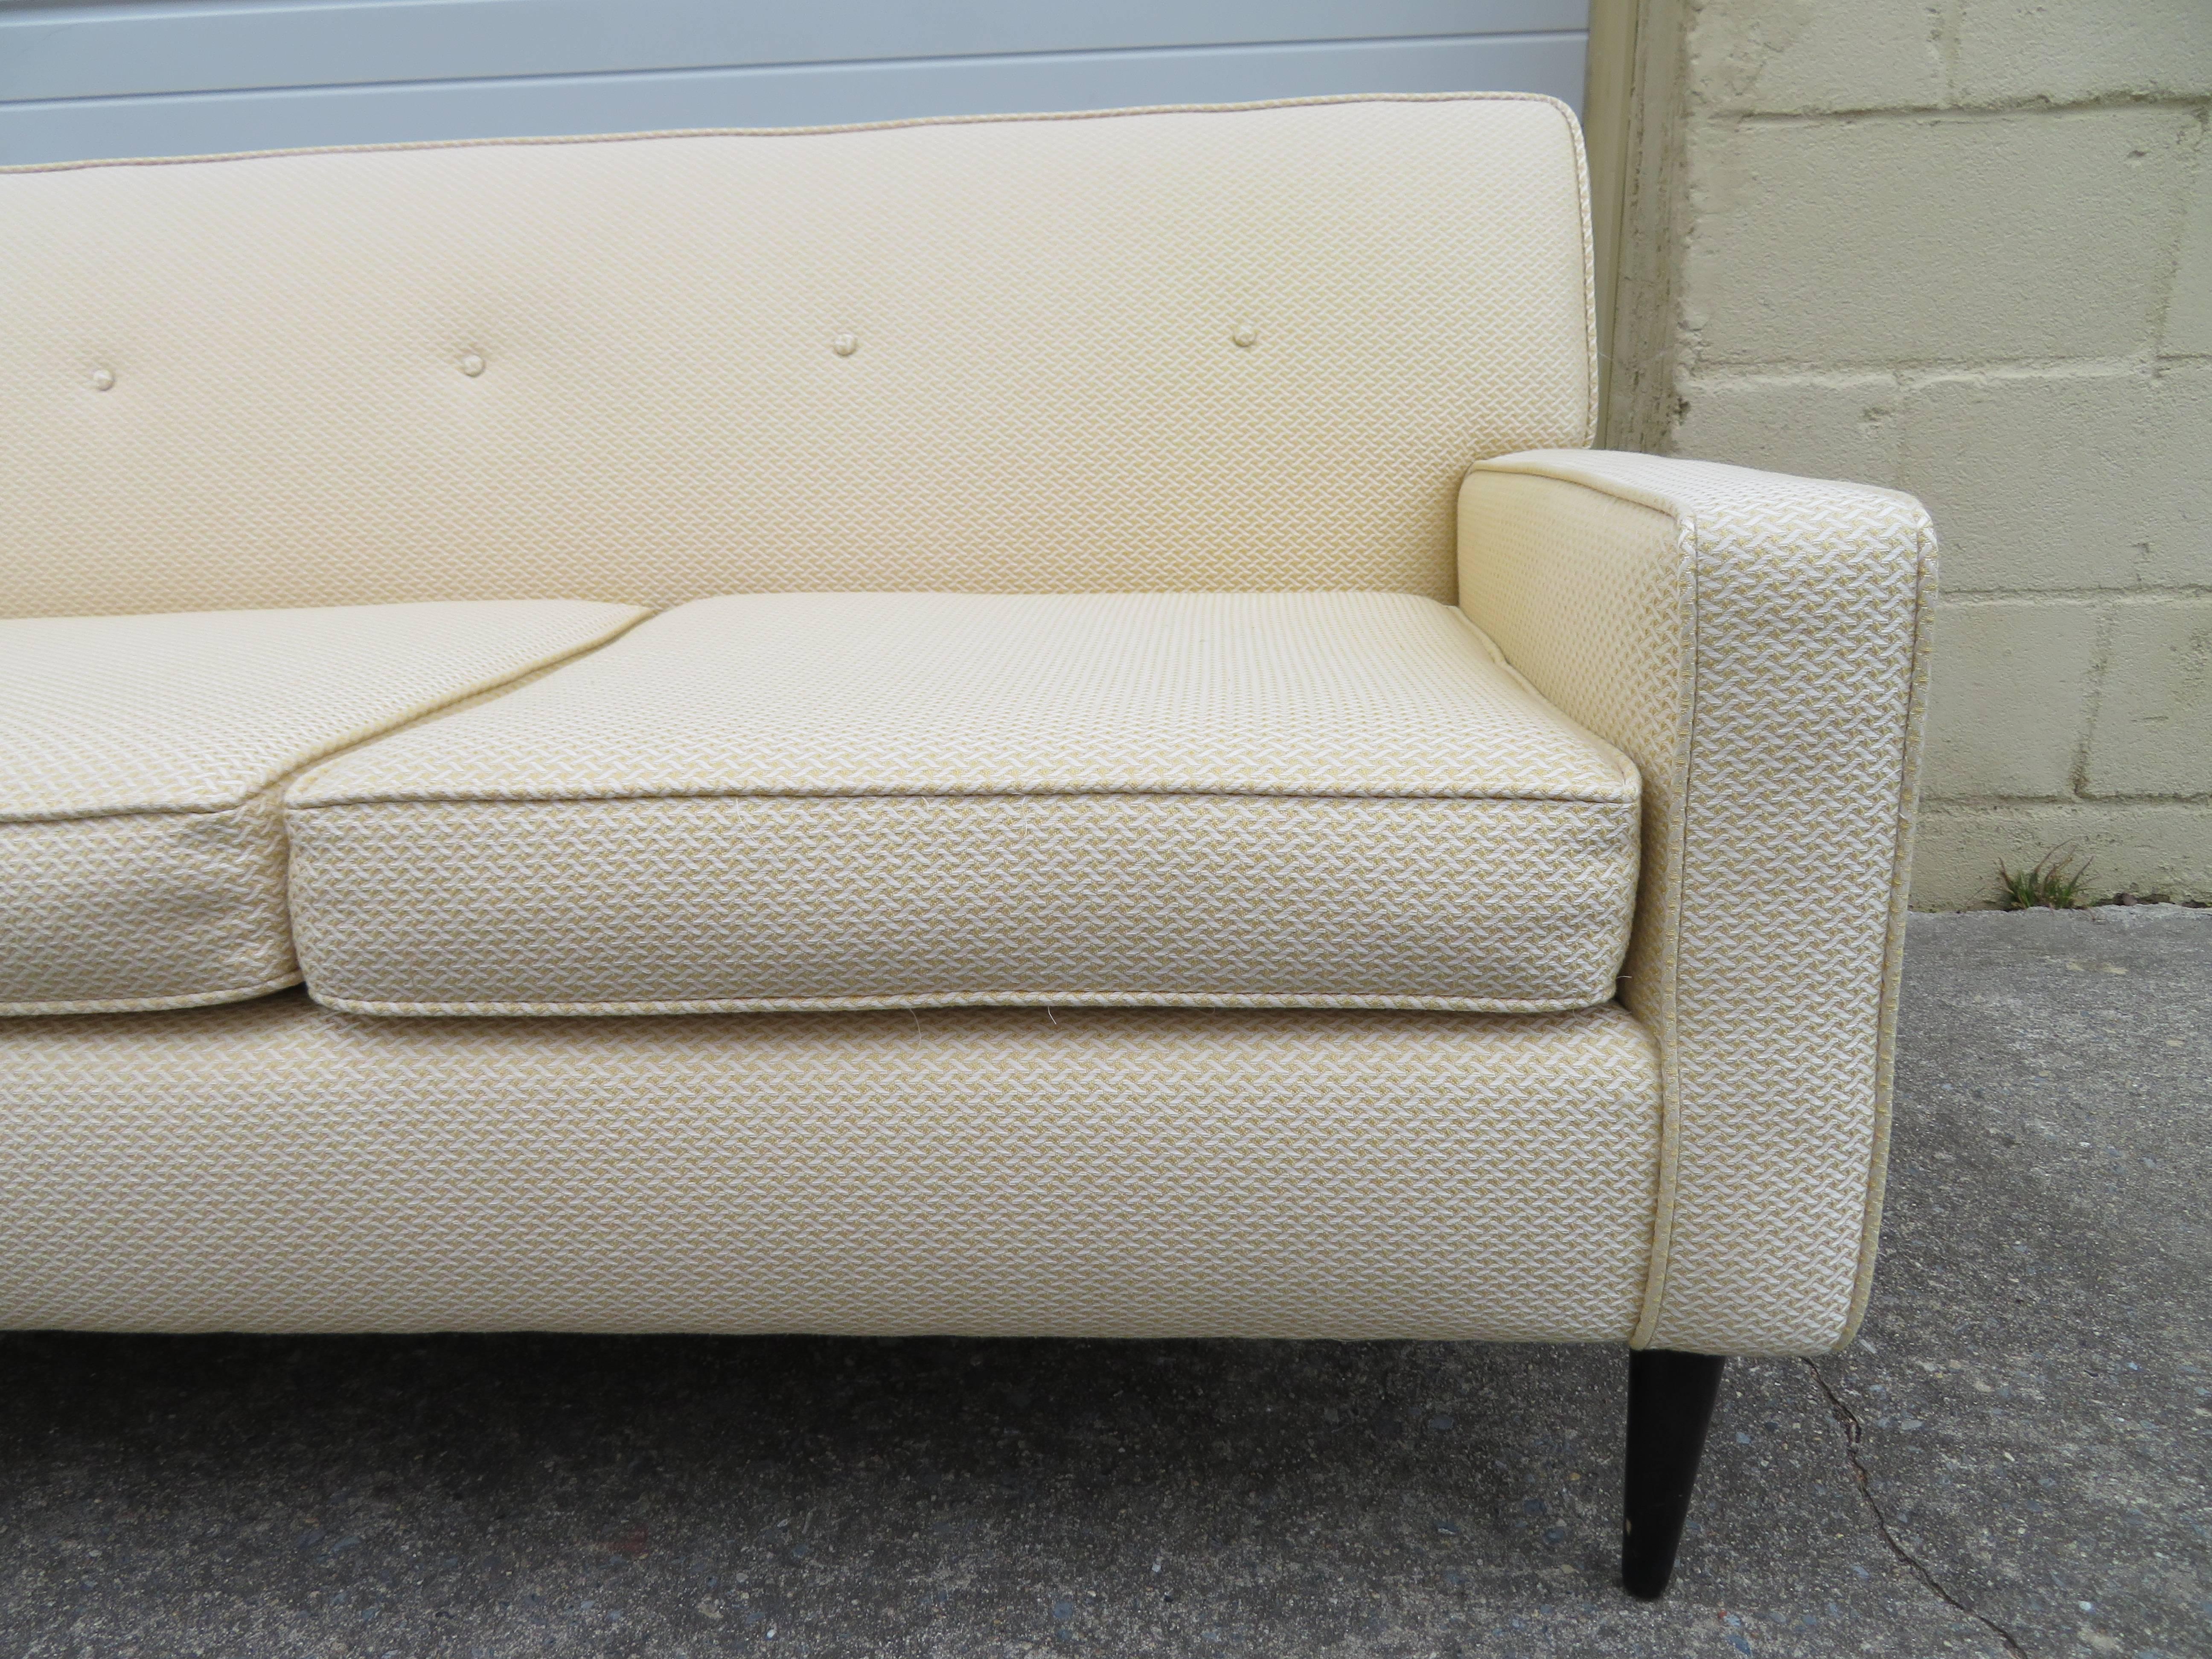 Handsome Harvey Probber Style Four-Seat Sofa, Mid-Century Modern In Good Condition For Sale In Pemberton, NJ